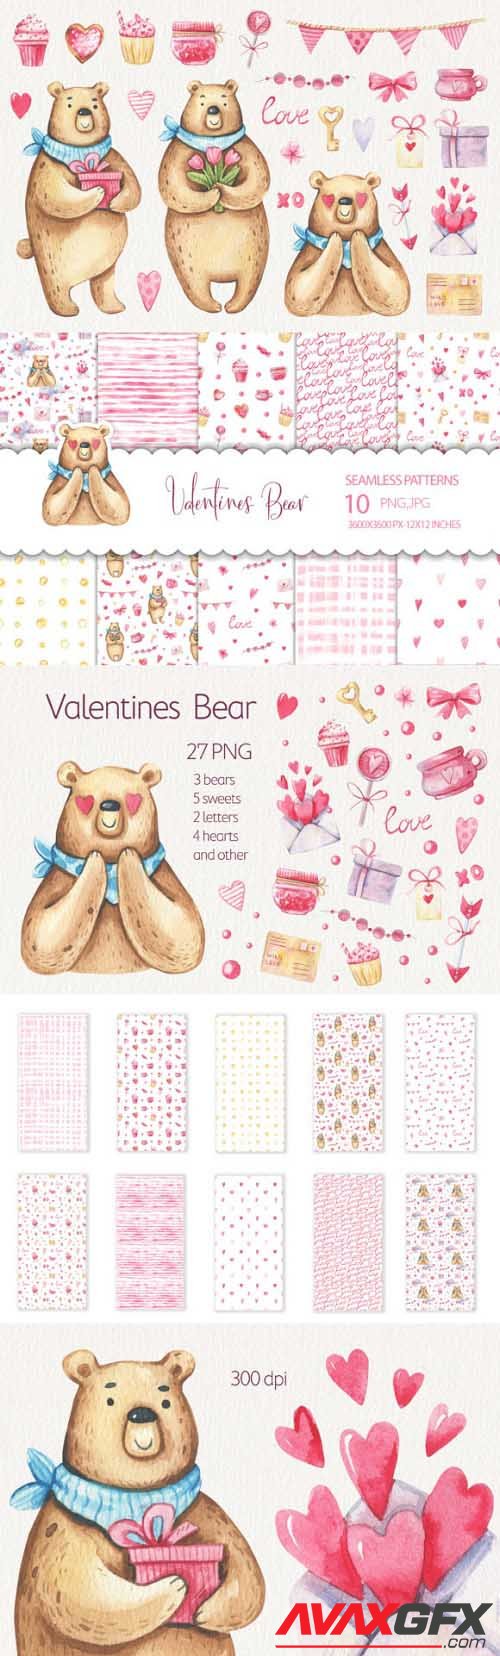 Watercolor Valentines Day Clipart and Seamless Patterns